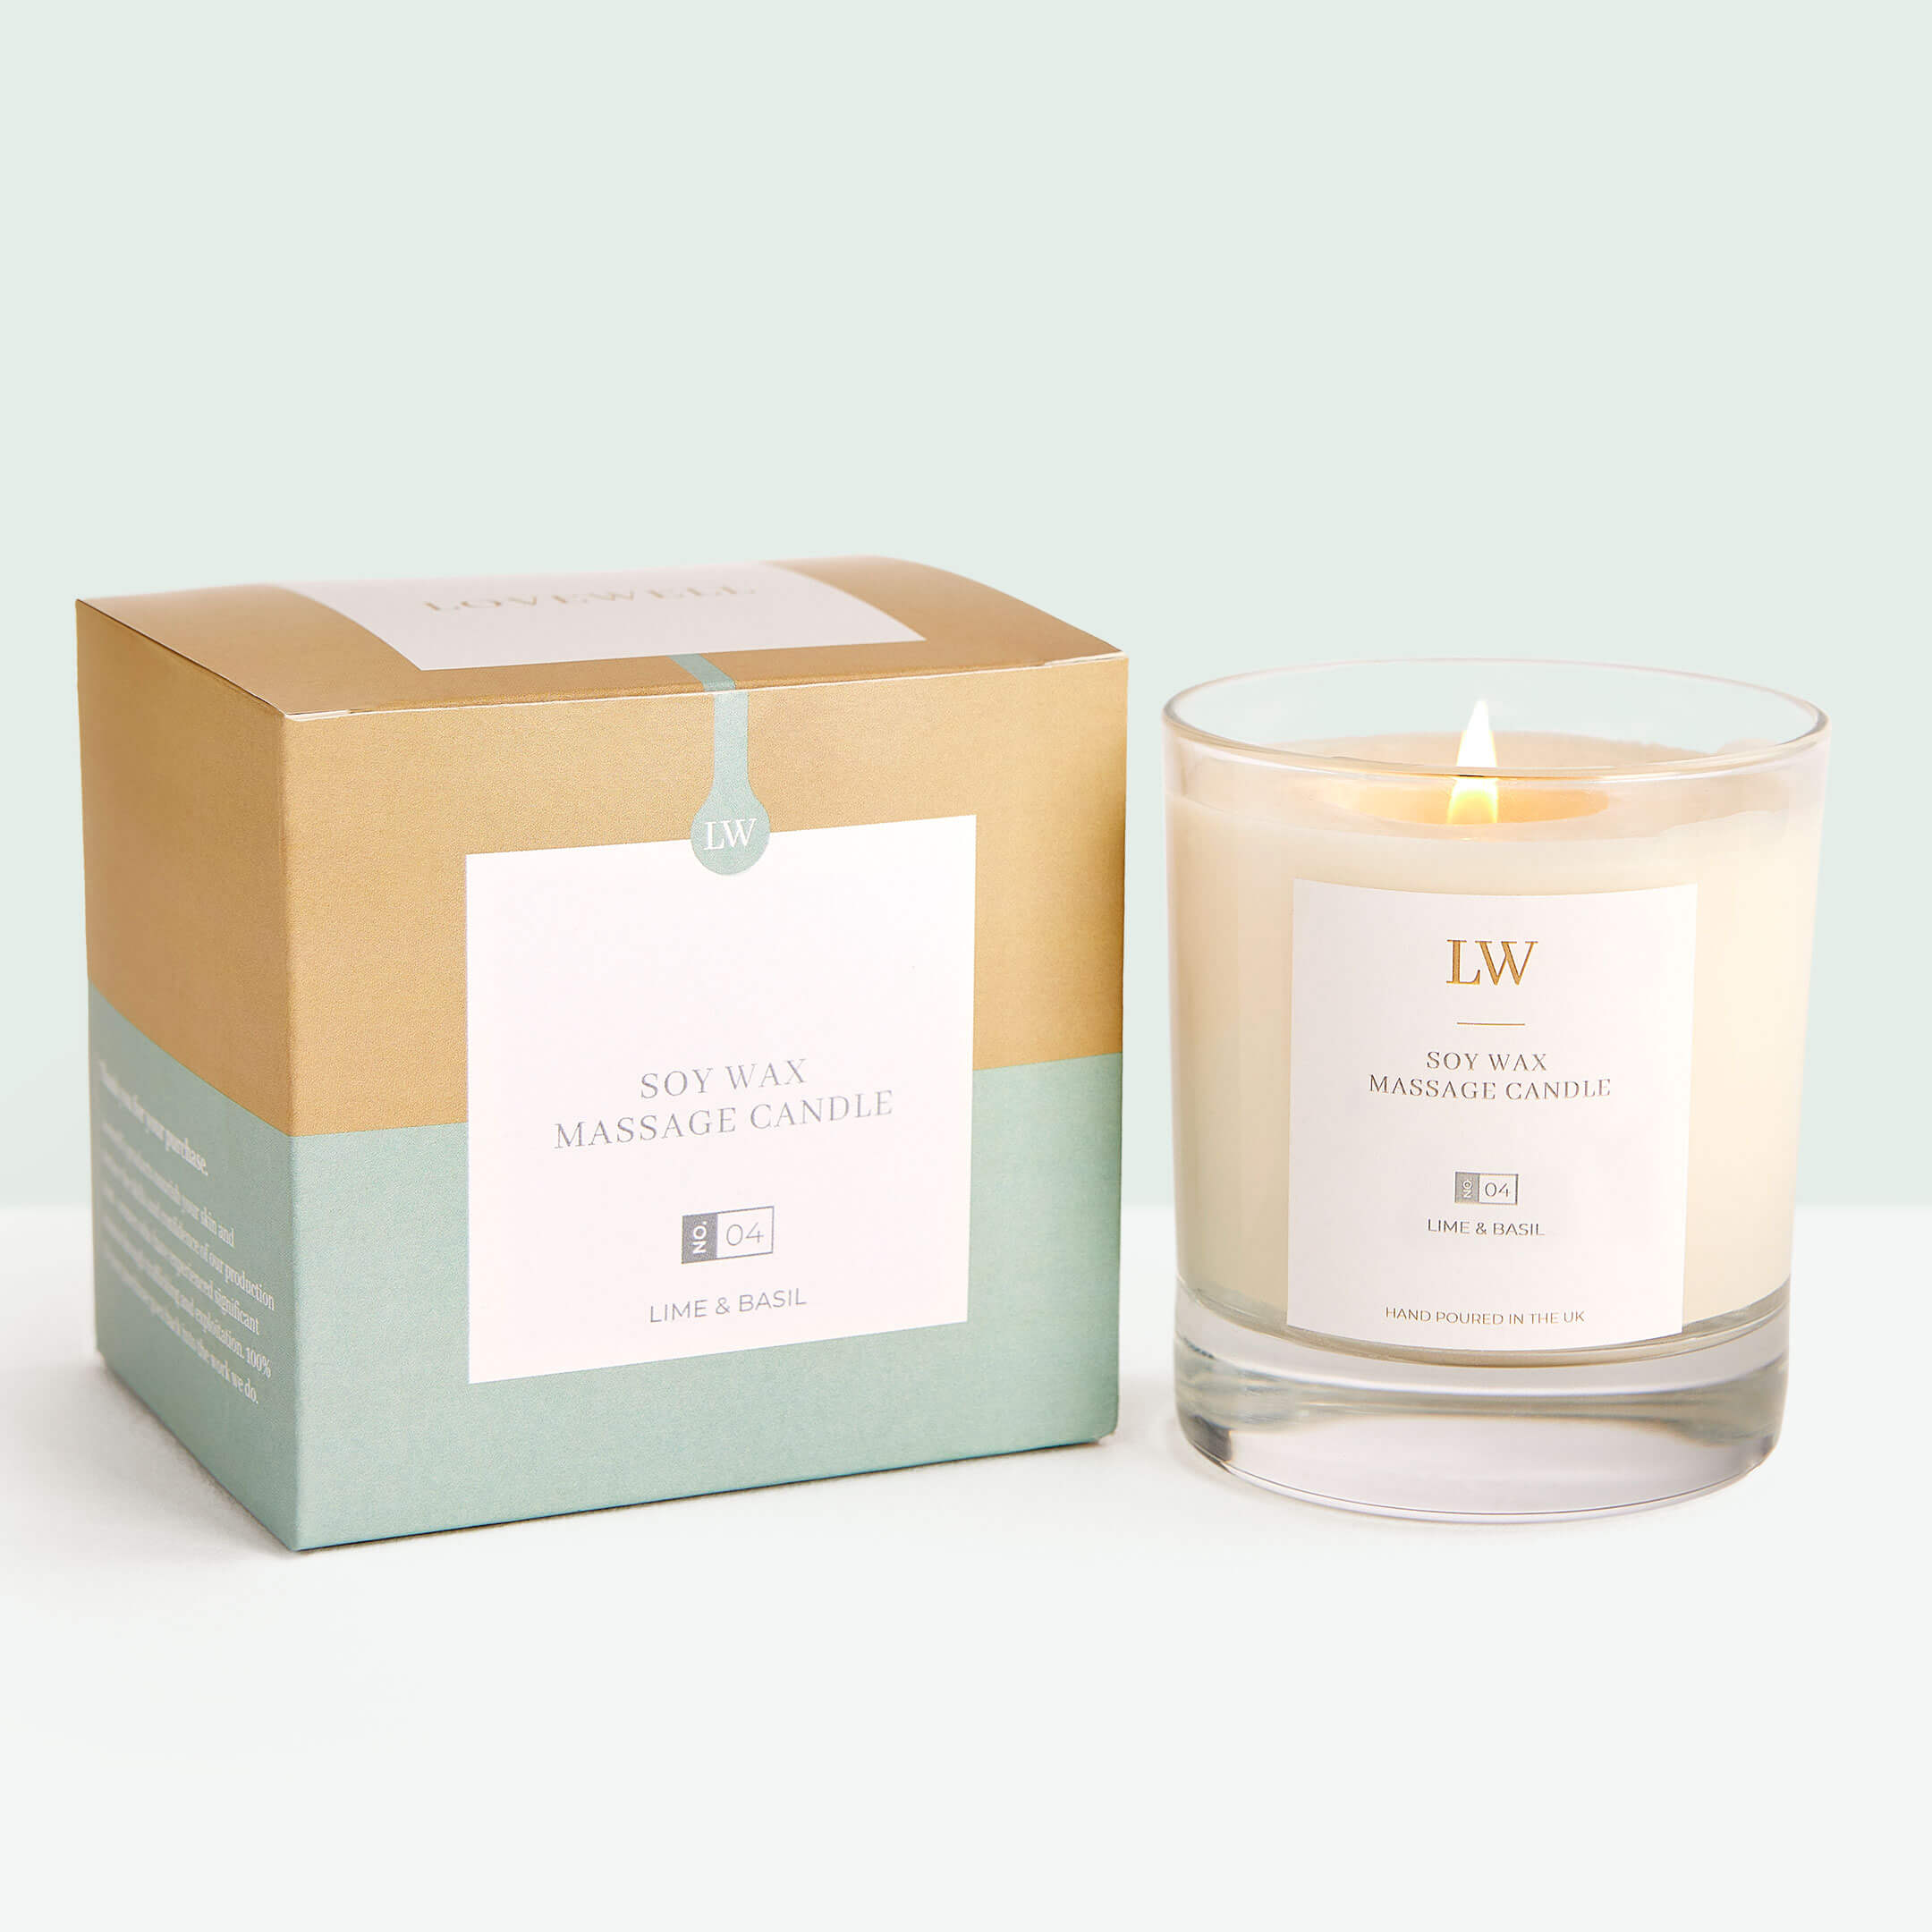 Lime & Basil Soy Wax Massage Candle